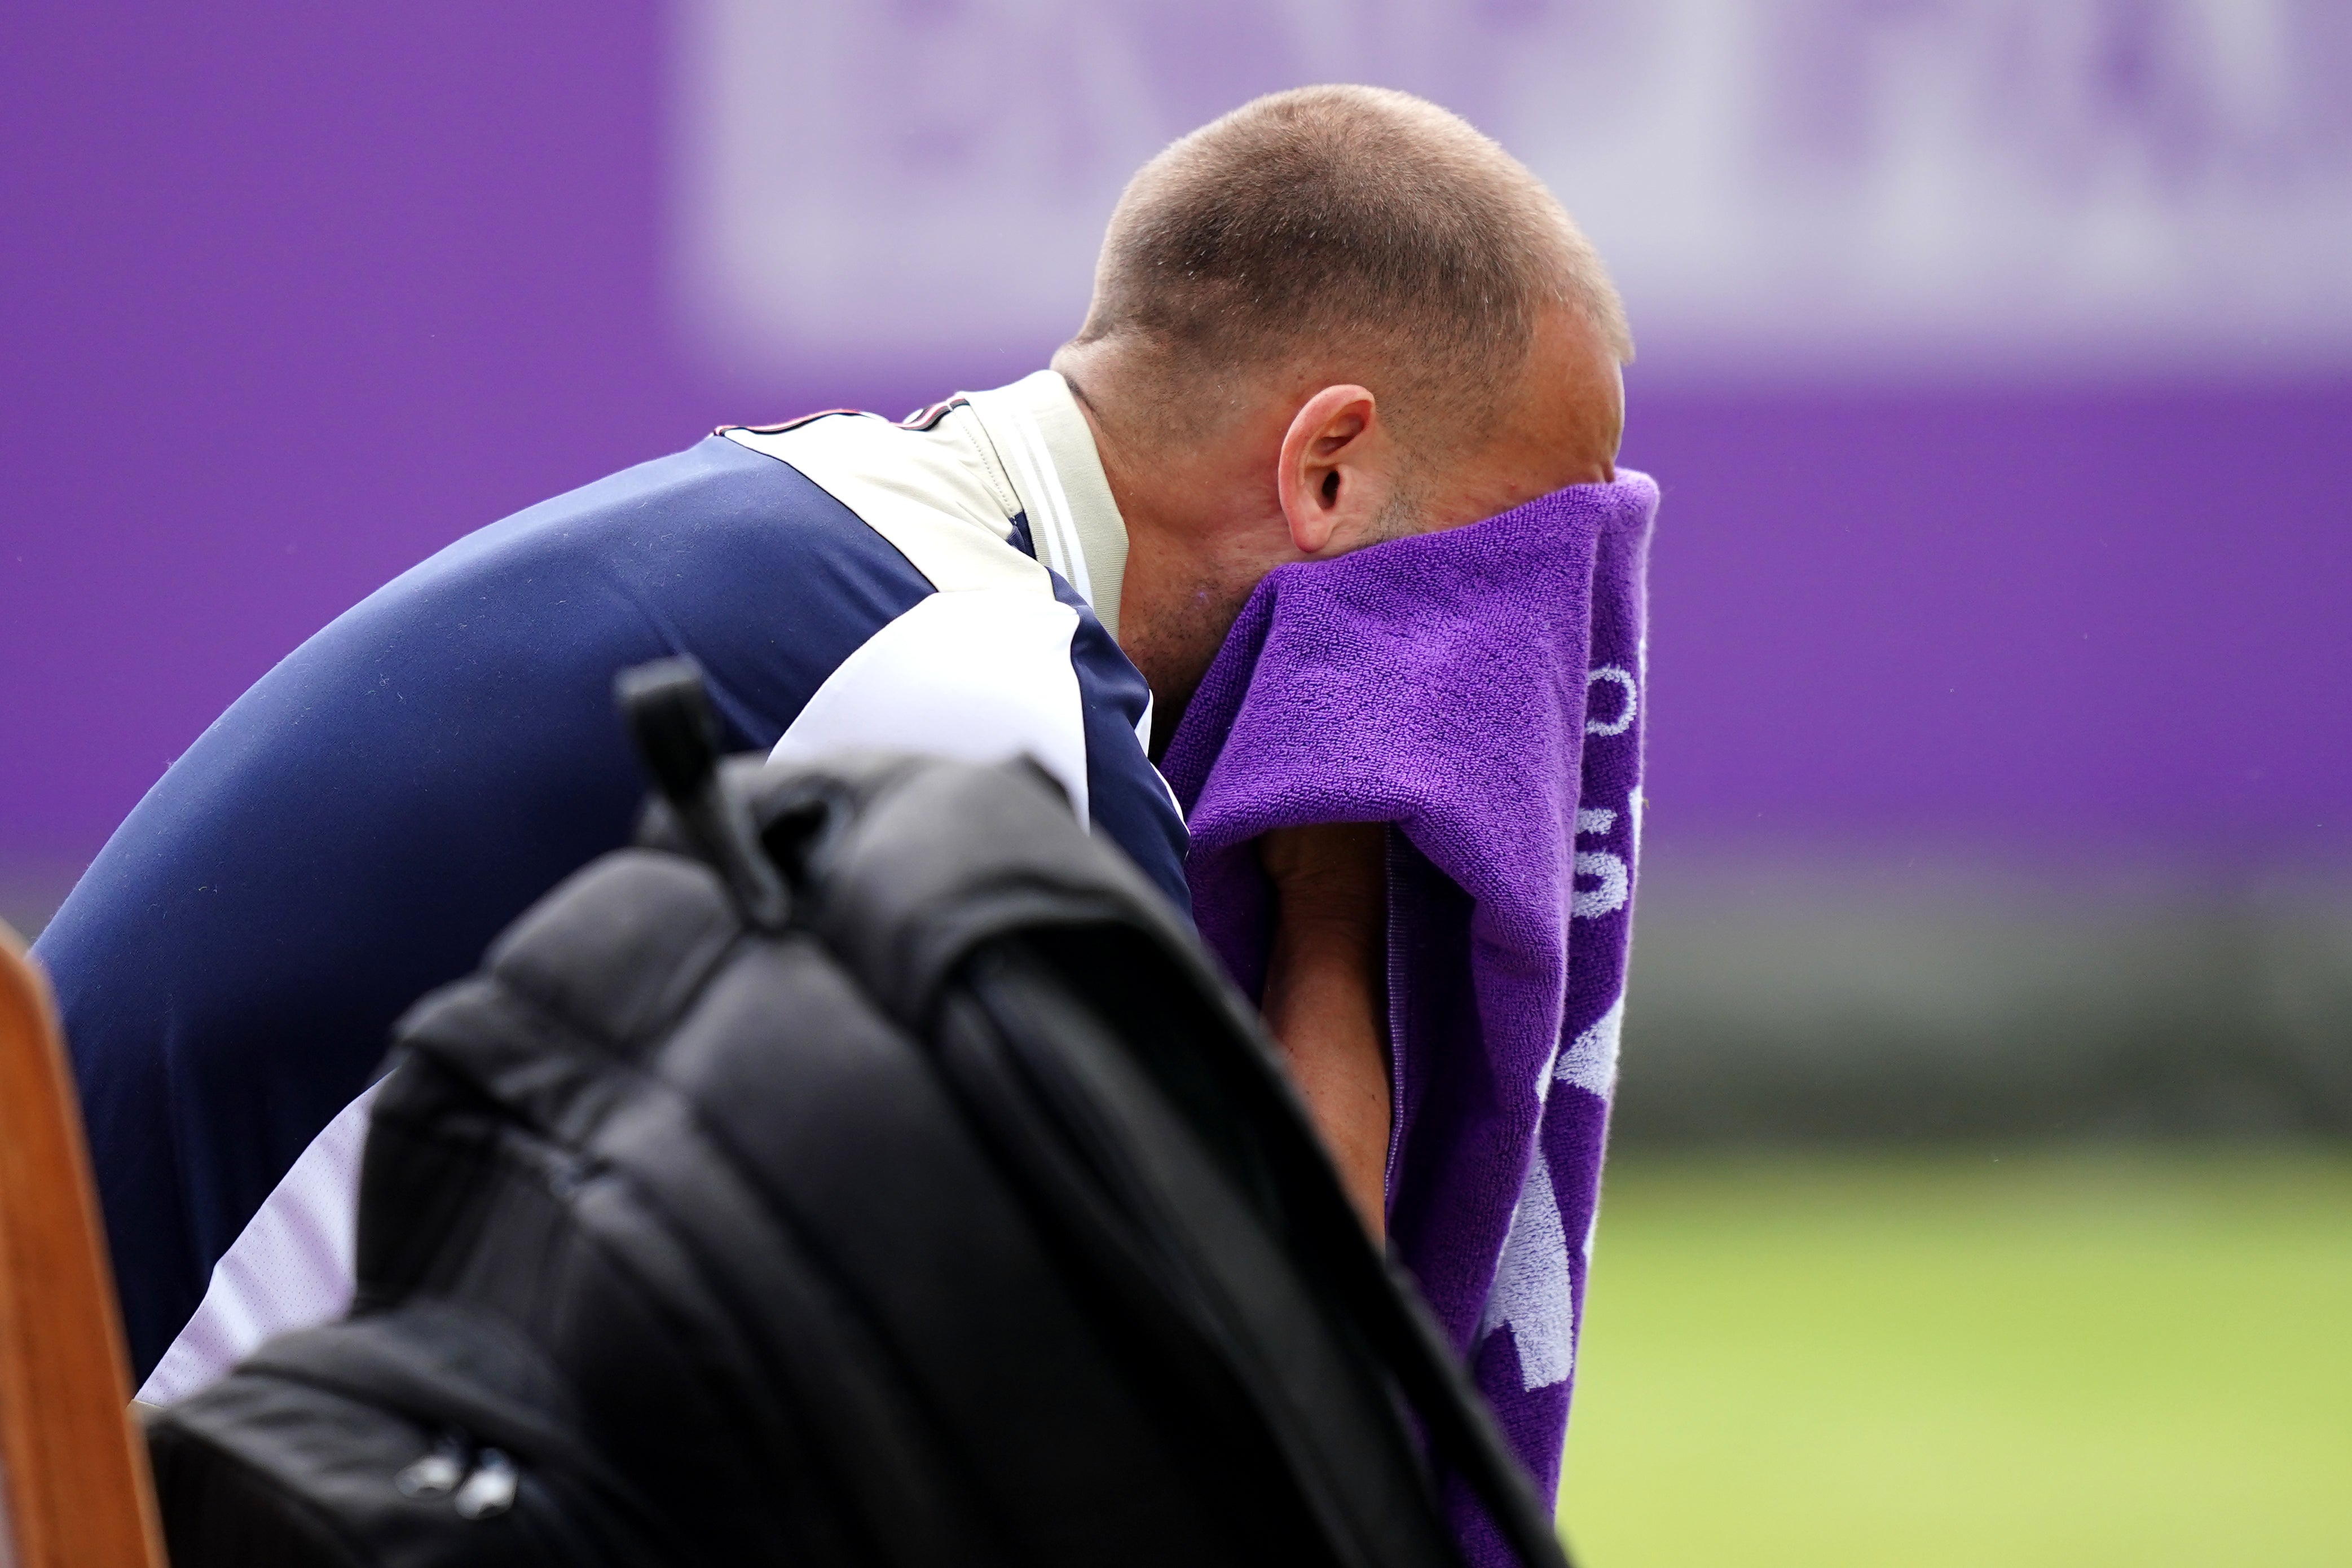 Evans hides his face in a towel (Zac Goodwin/PA)